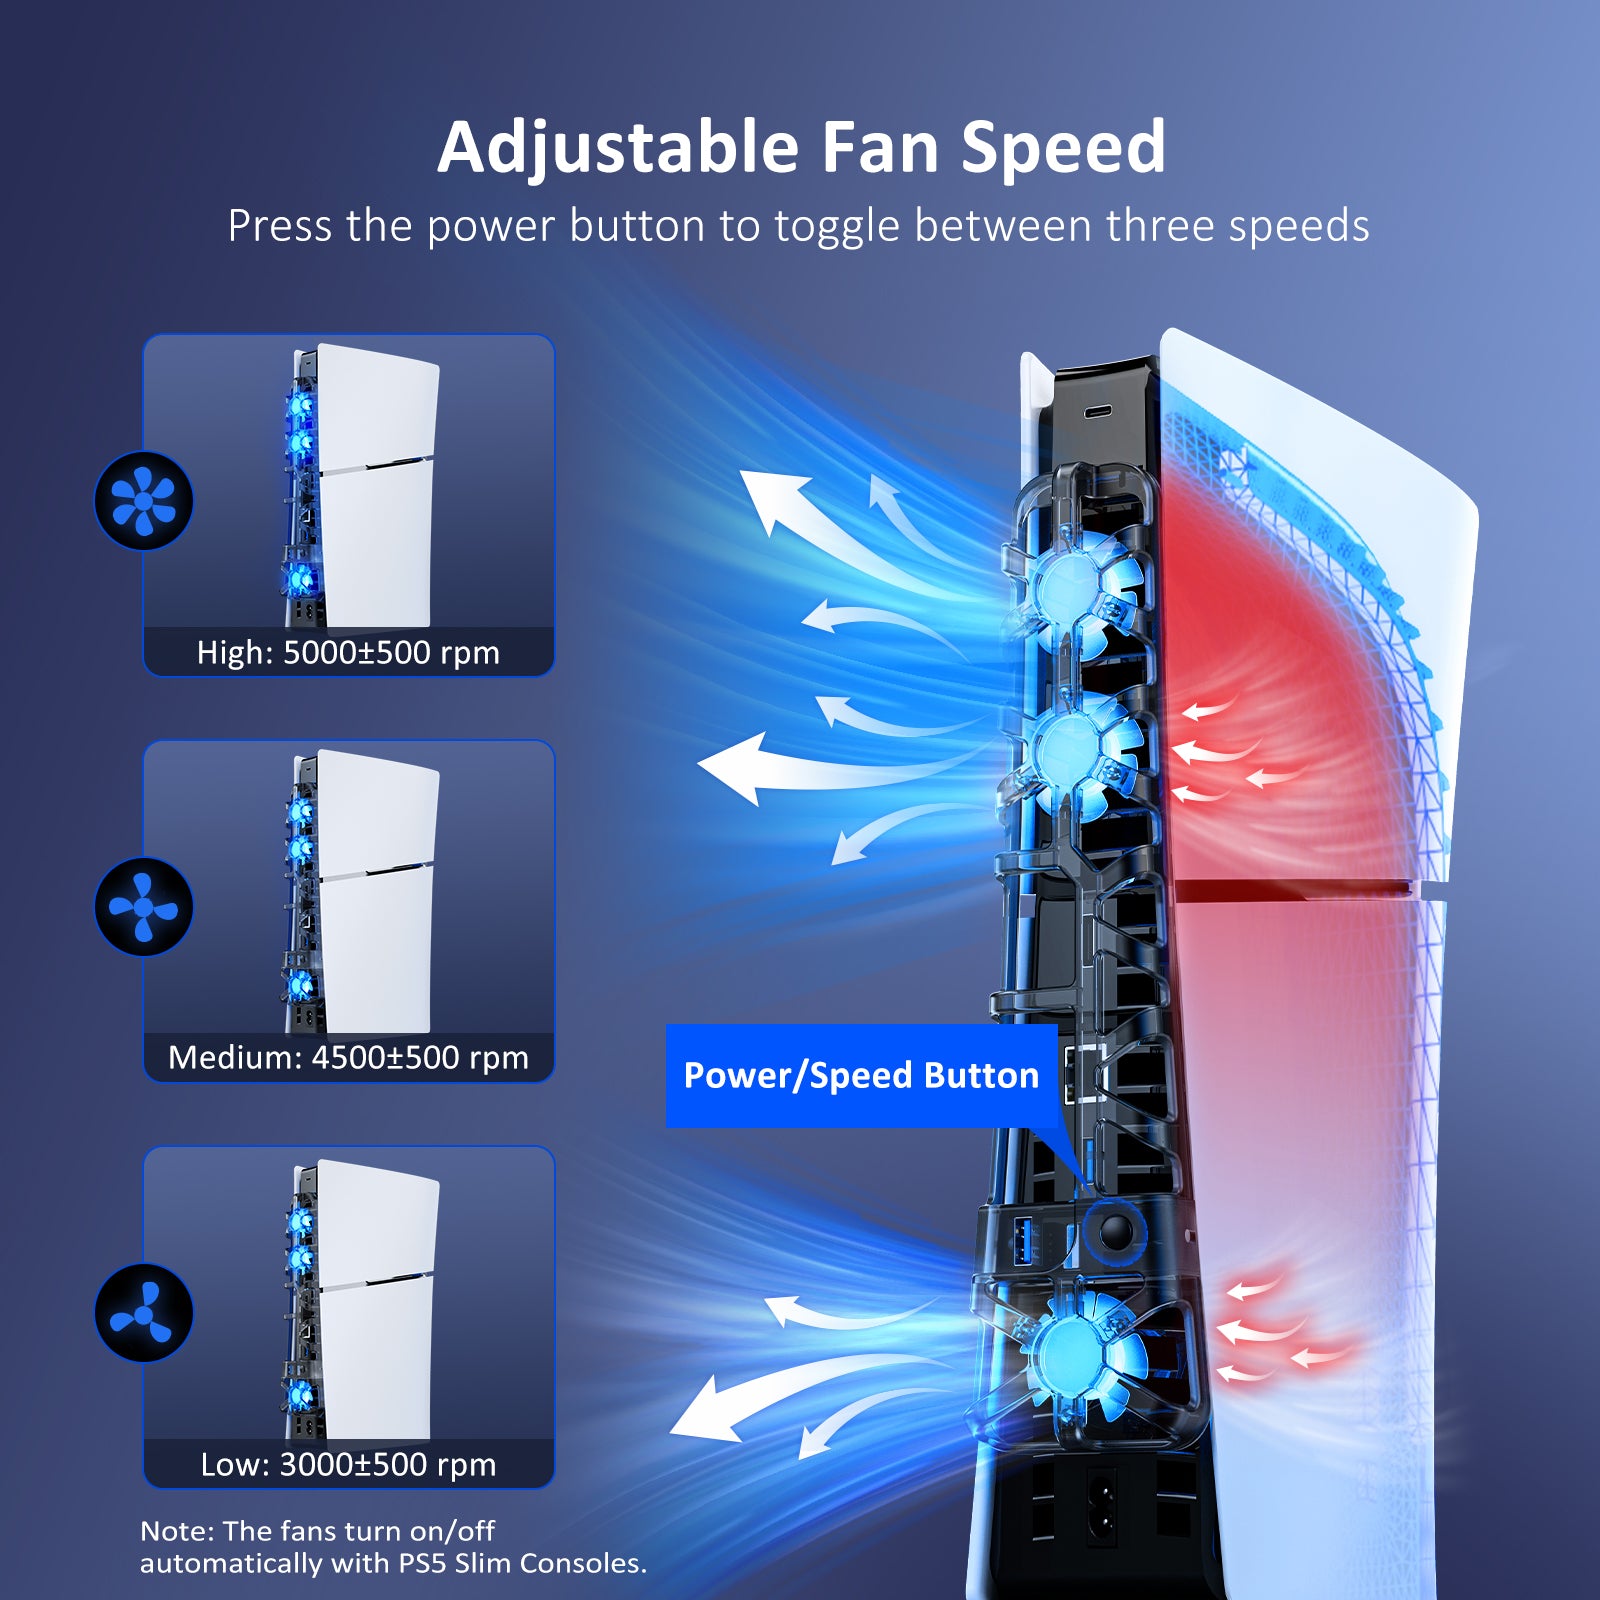 This fan features three adjustable speed levels.